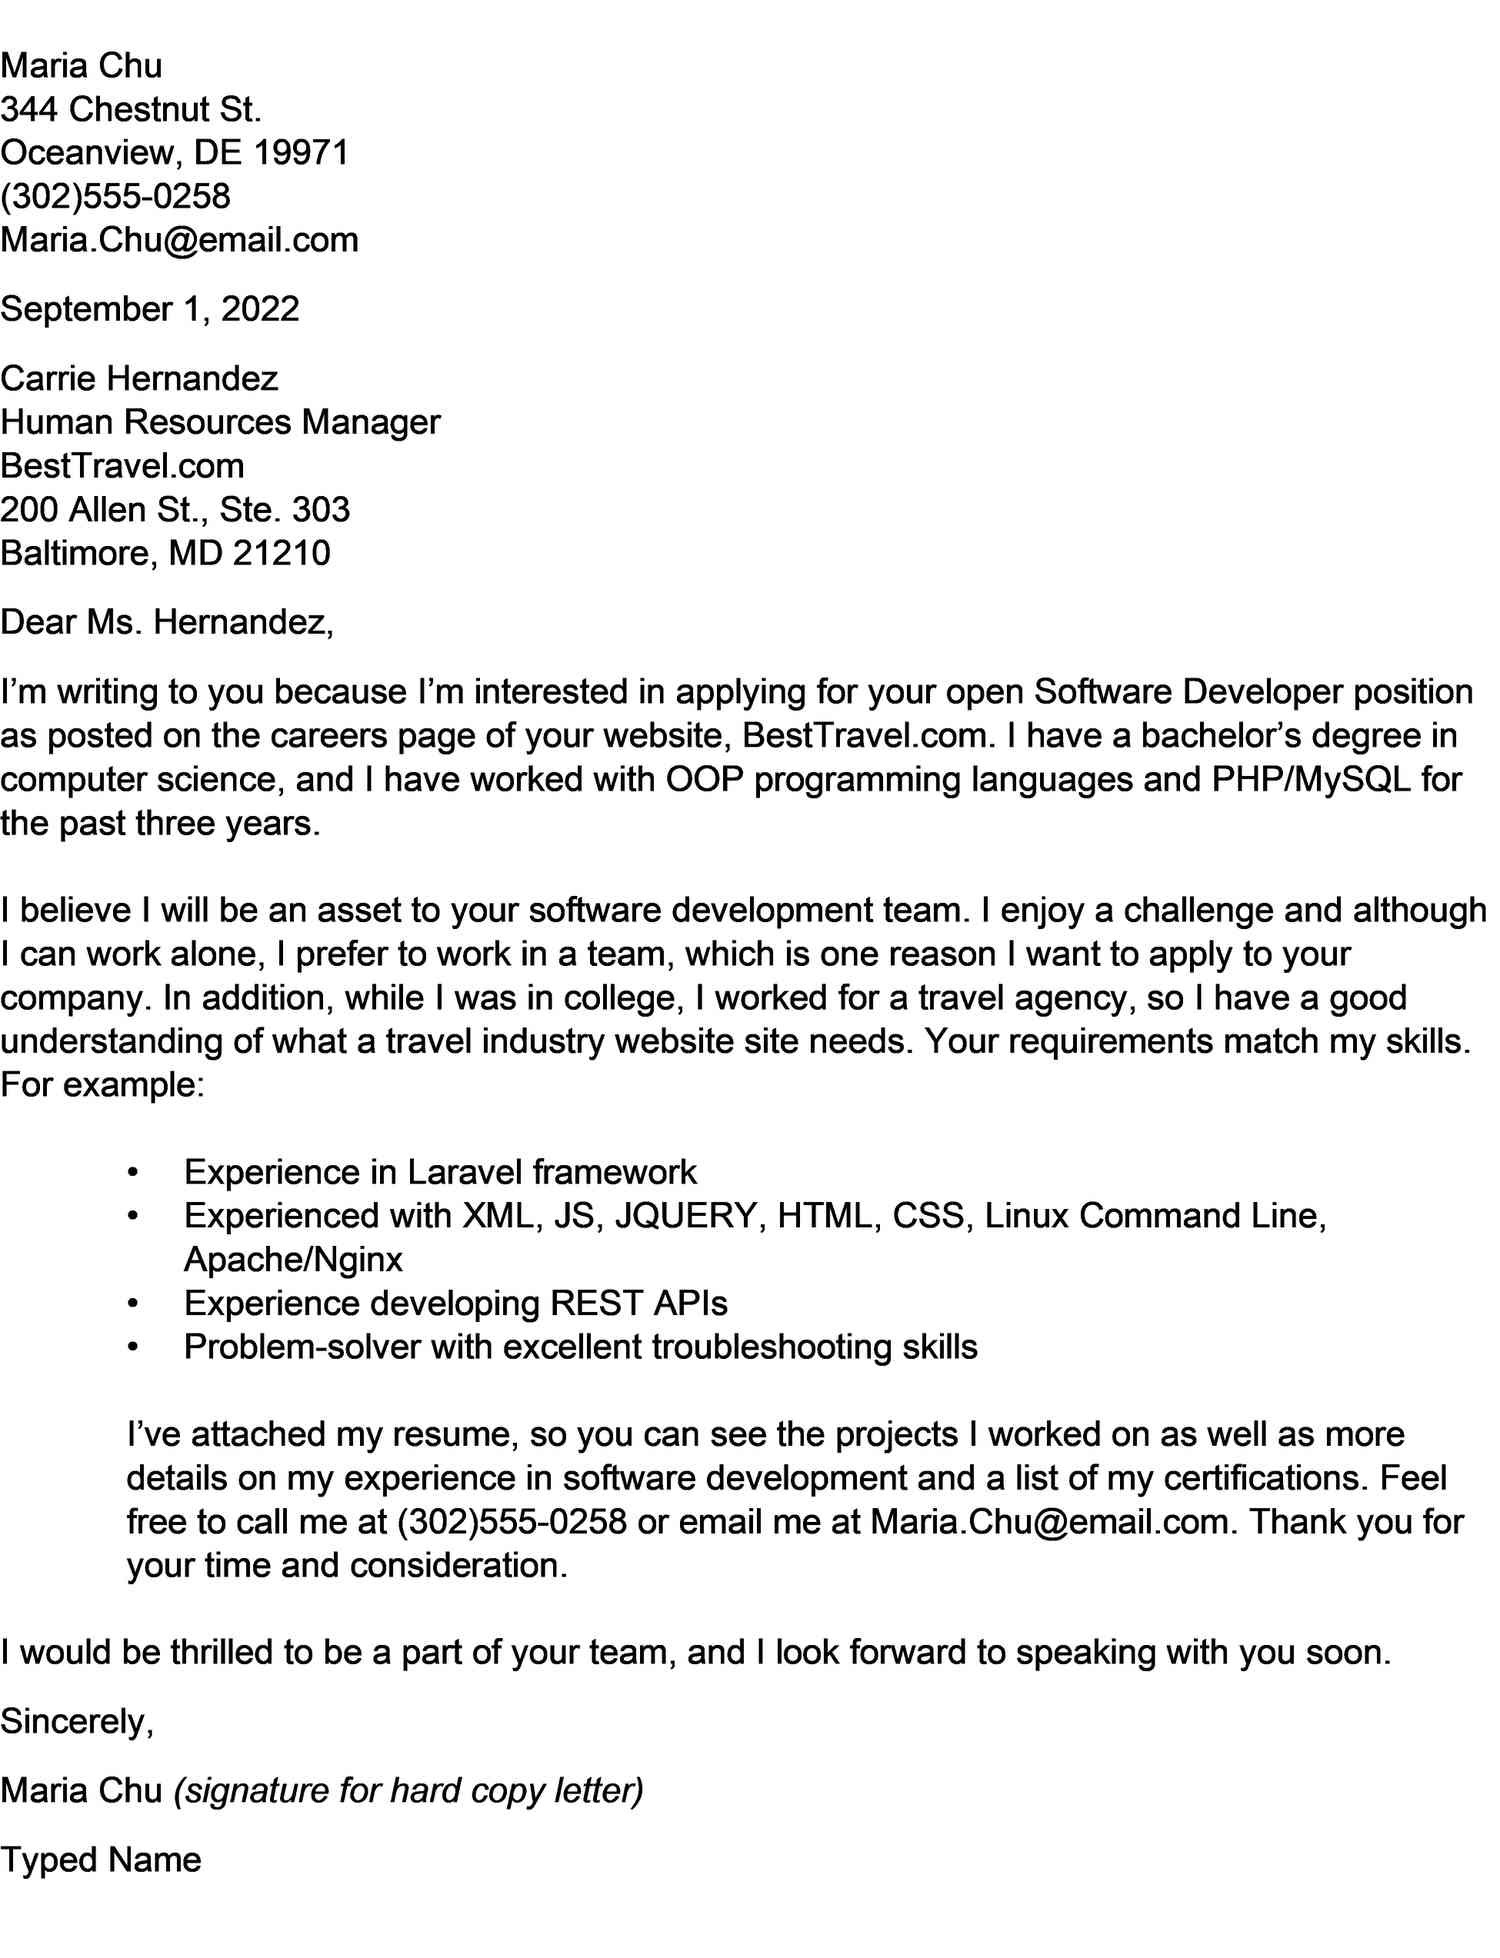 Sample Cover Letter Accompanying A Resume Cover Letter Examples Listed by Type Of Job